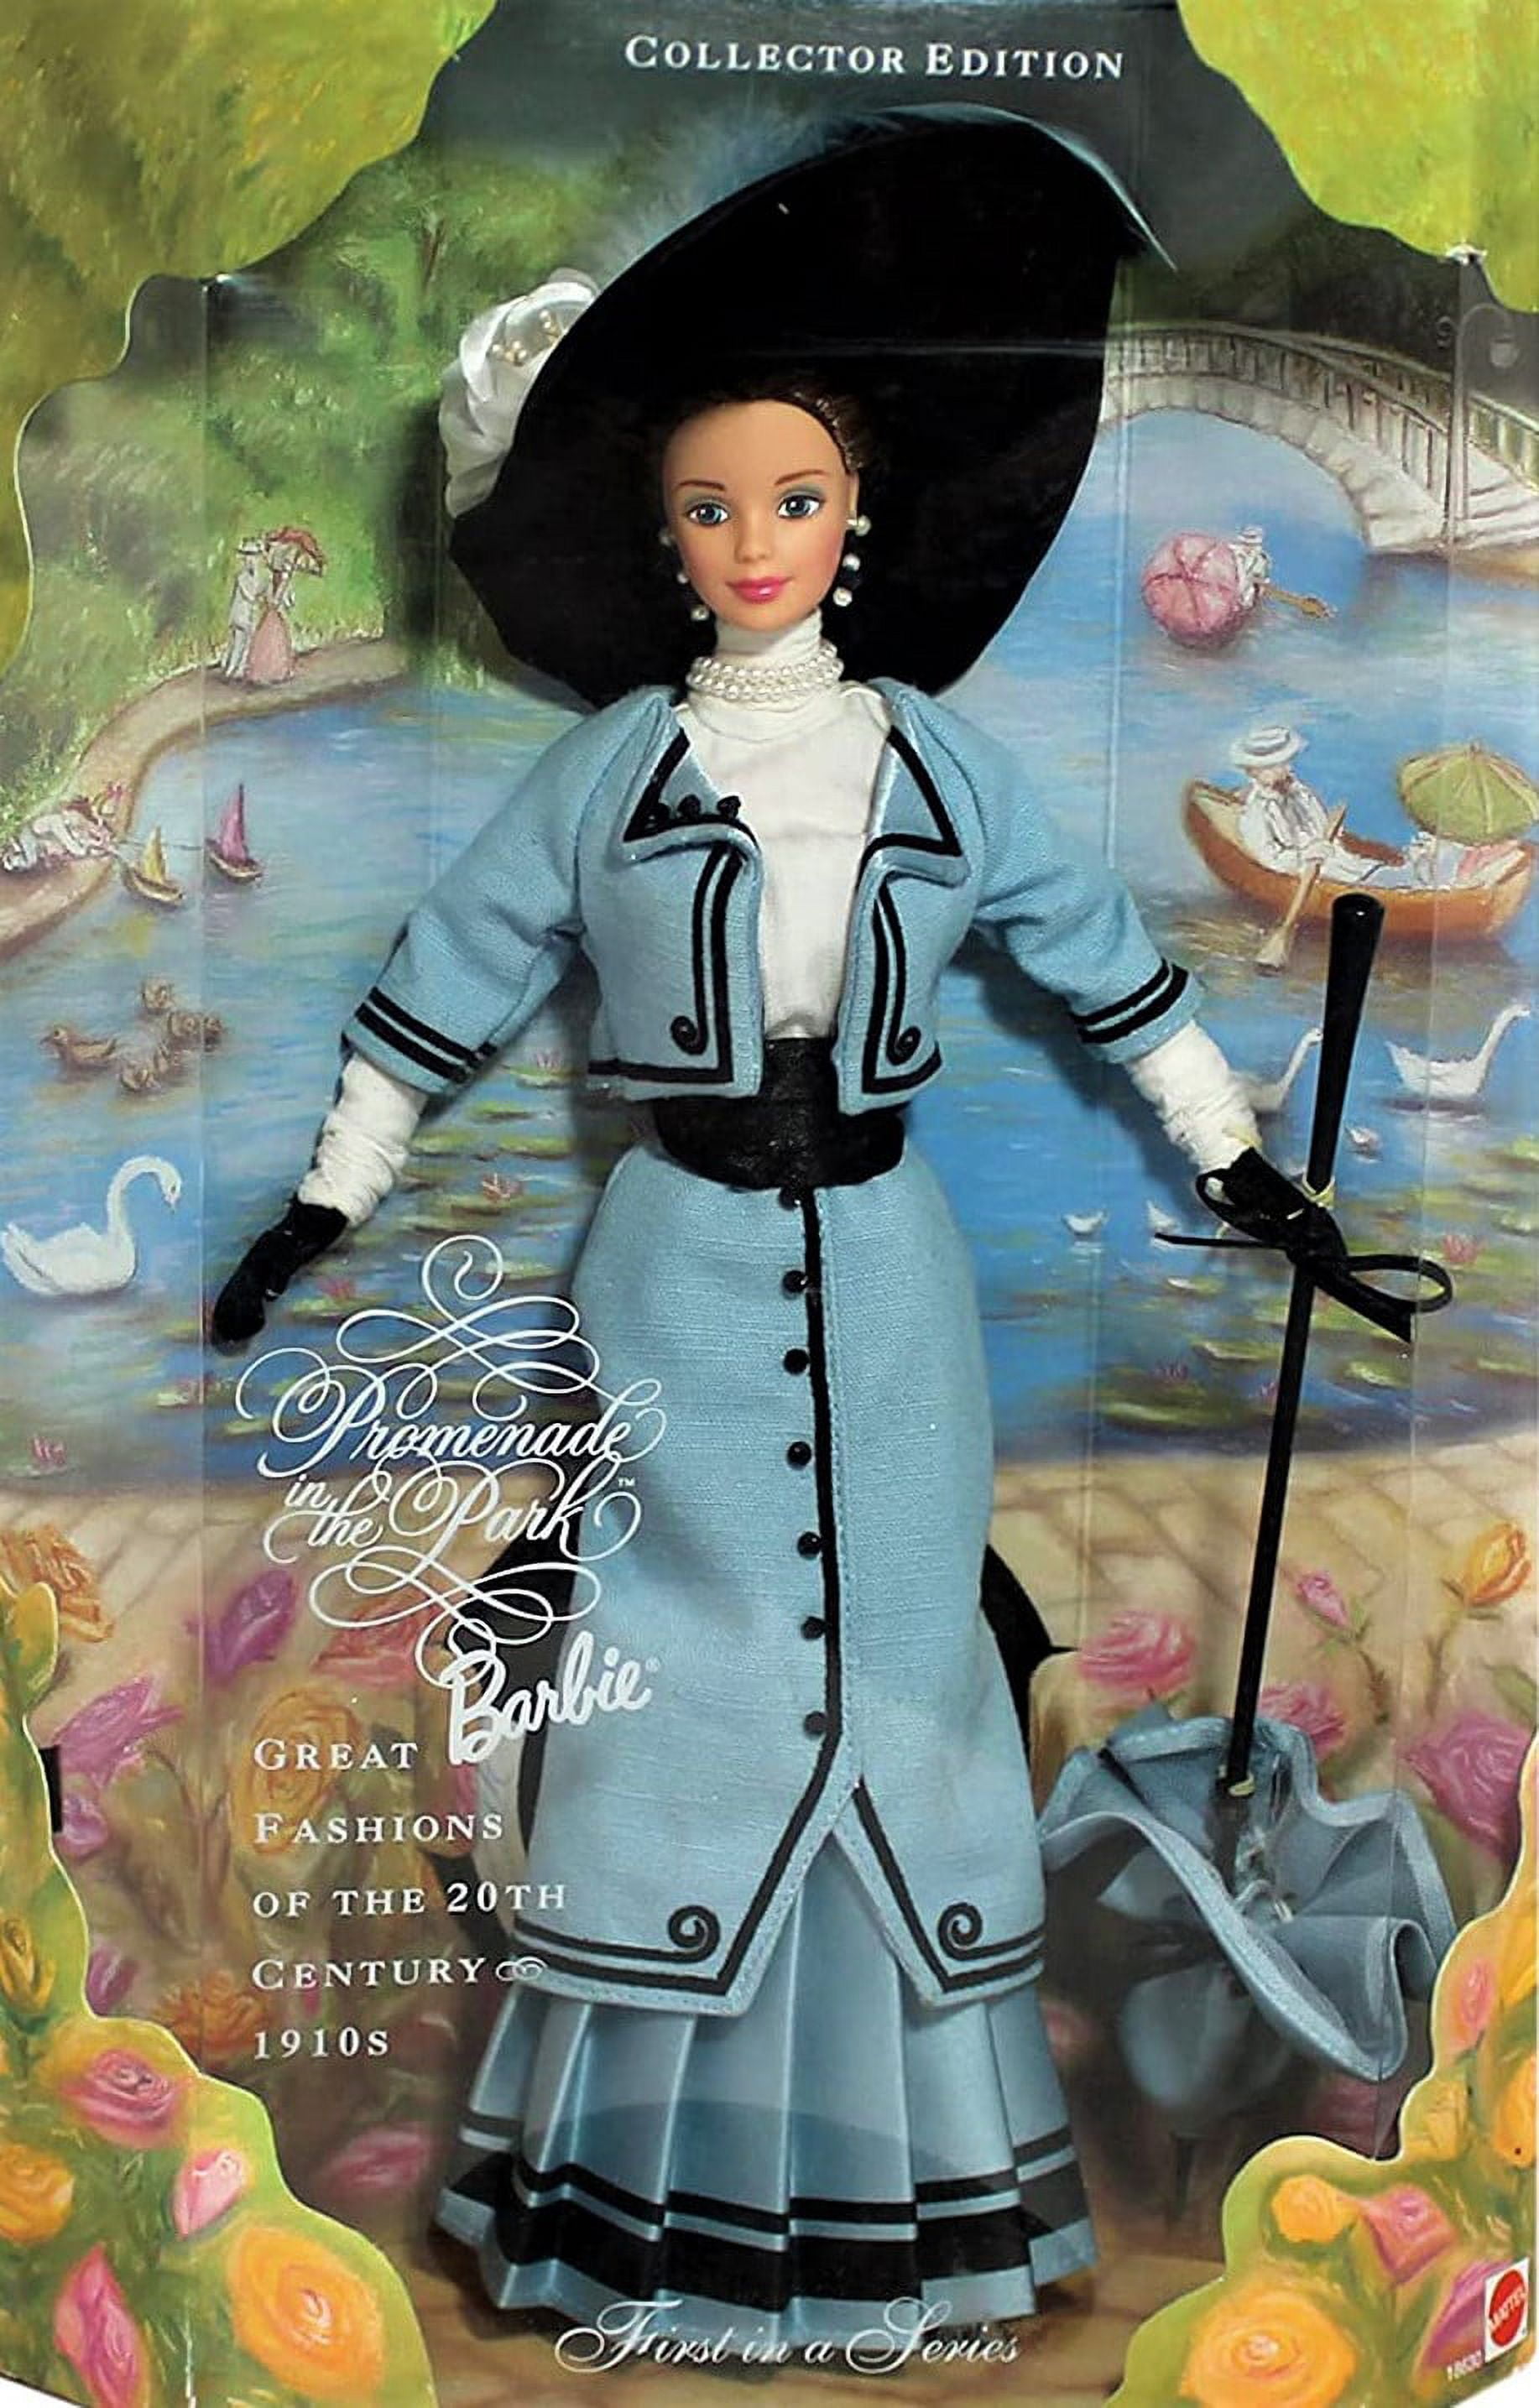 Promenade in the Park Barbie Doll Great Fashions of the 20th Century 1910's